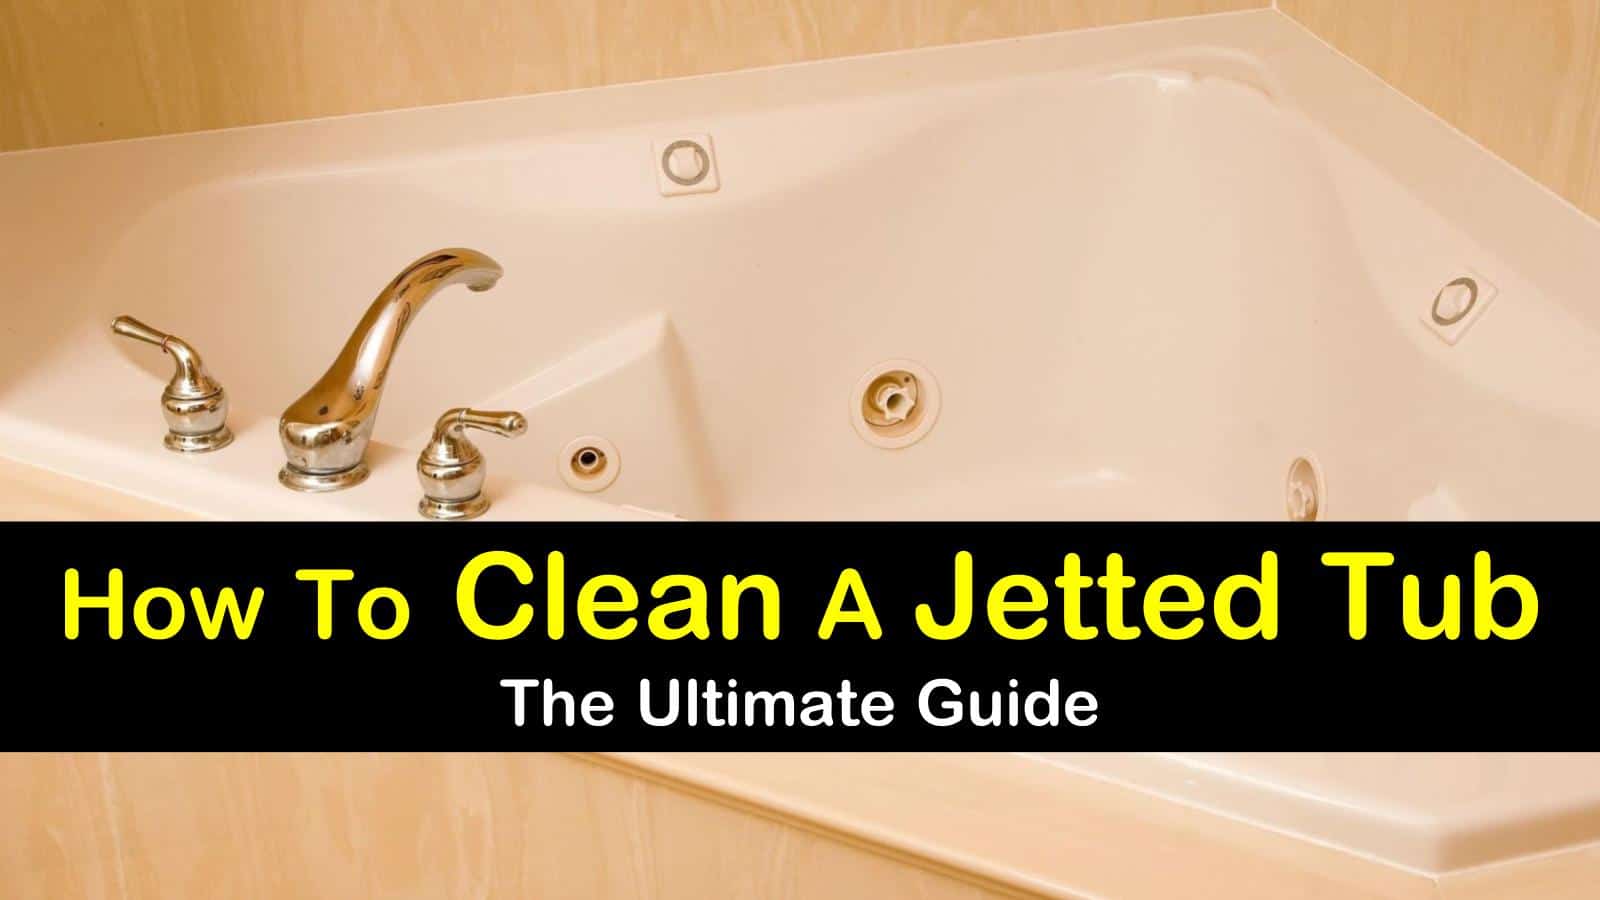 3 Smart Simple Ways To Clean A Jetted Tub, How To Get Bathtub Jets Working